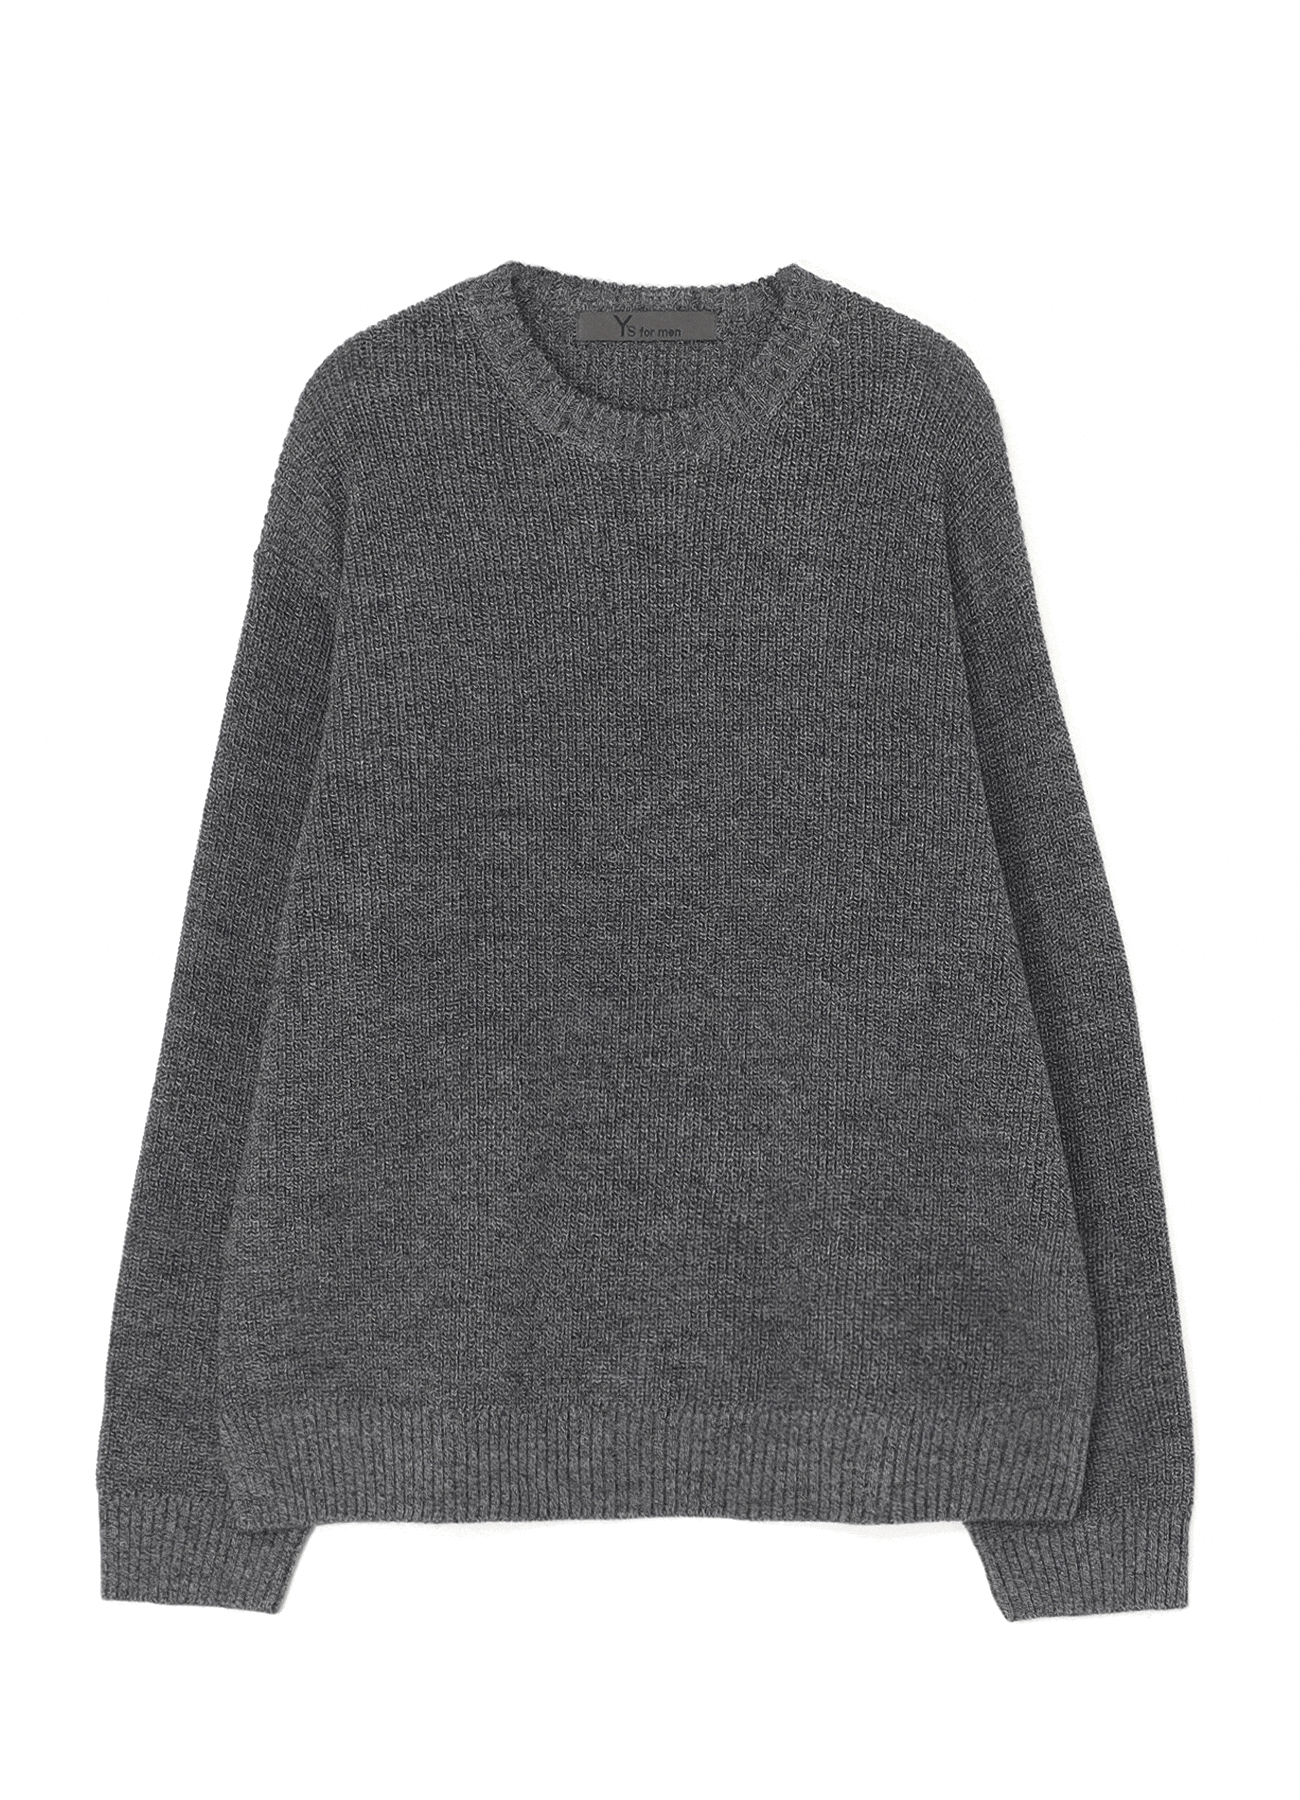 ROUND NECK KNIT WITH Y's for men LOGO PRINT